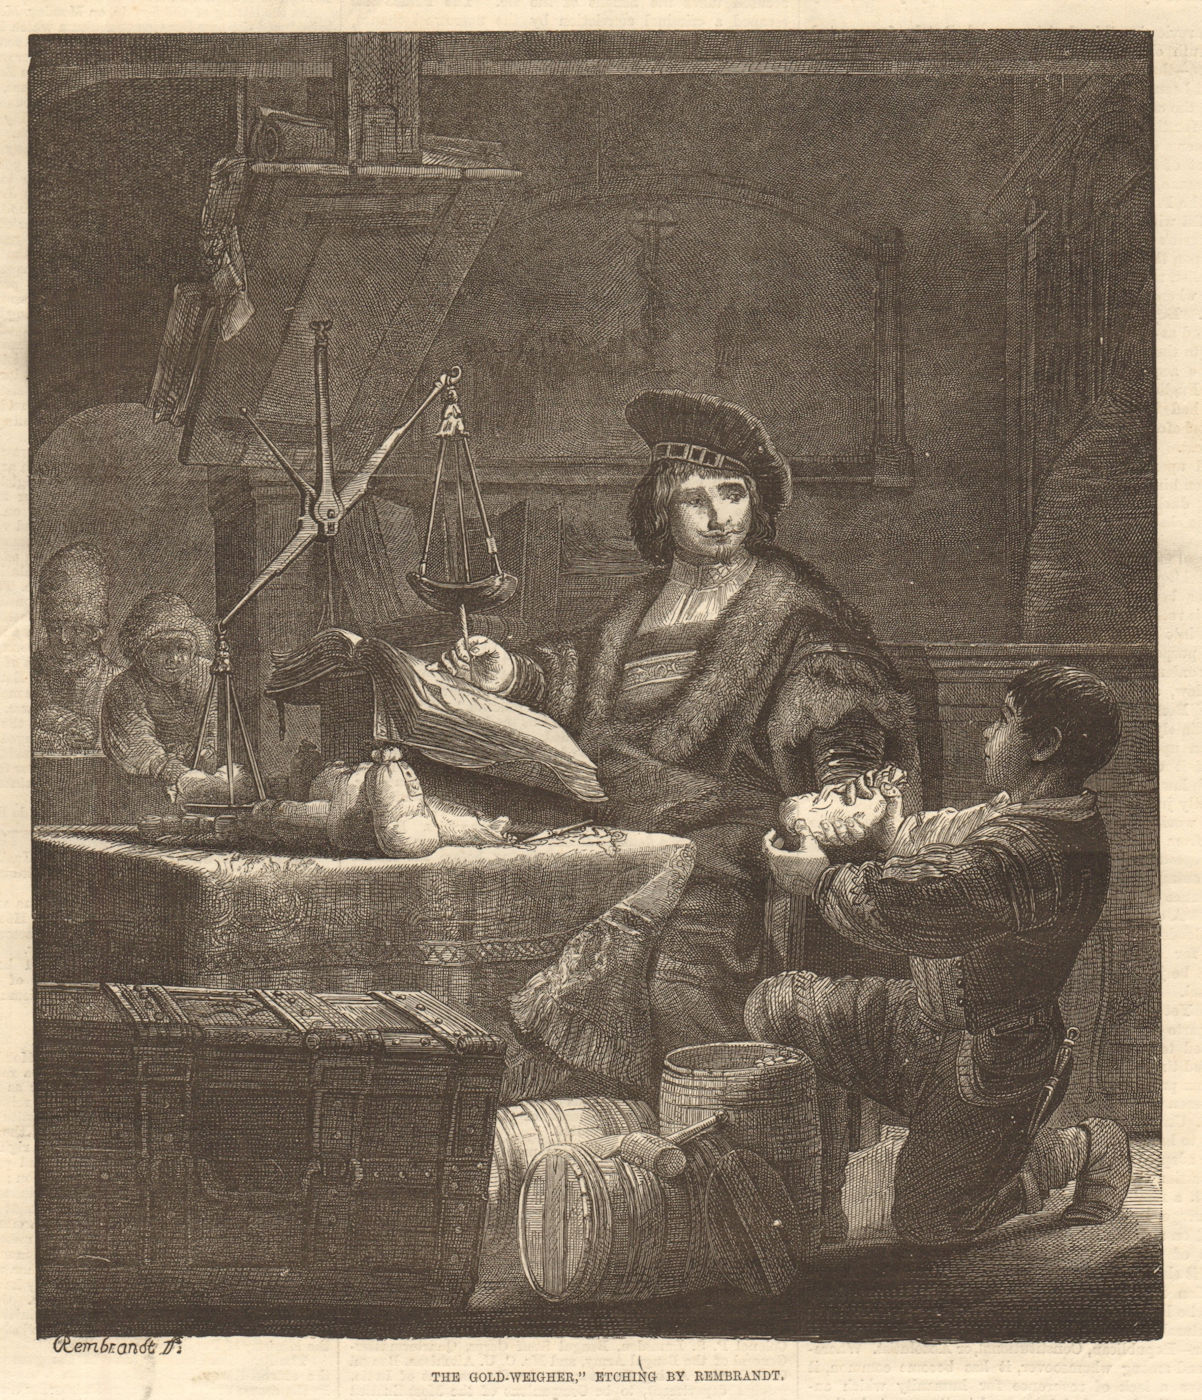 Associate Product "The gold-weighter", etching by Rembrandt. Fine Arts 1870 ILN full page print